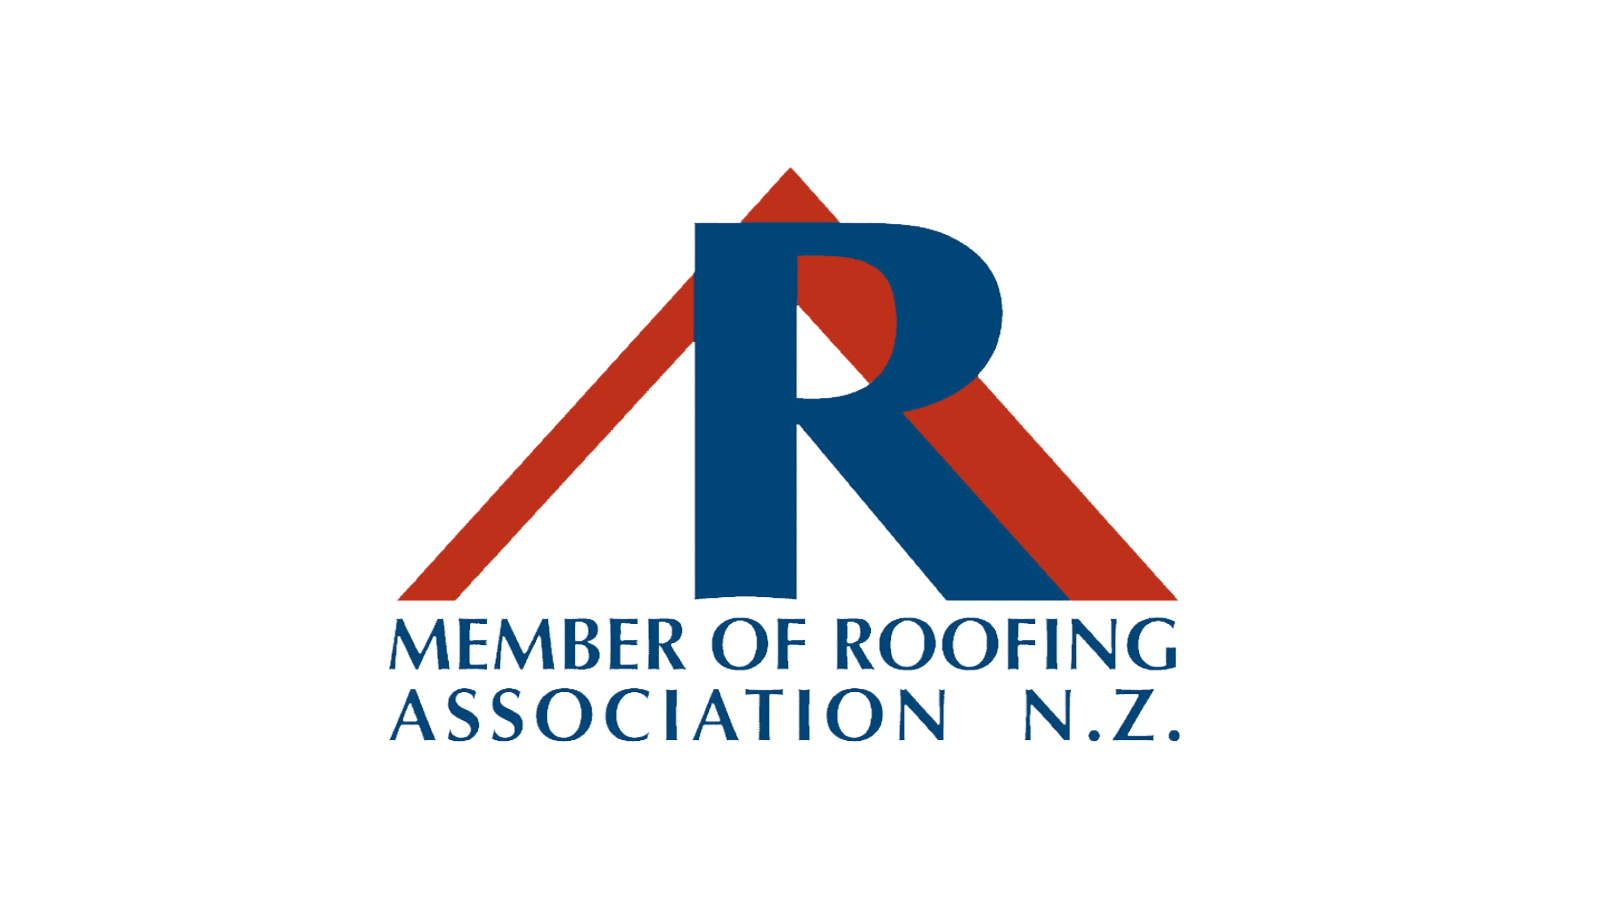 Roofing Association N.Z., logo - a stylized image of a roof with the company's name prominently displayed.